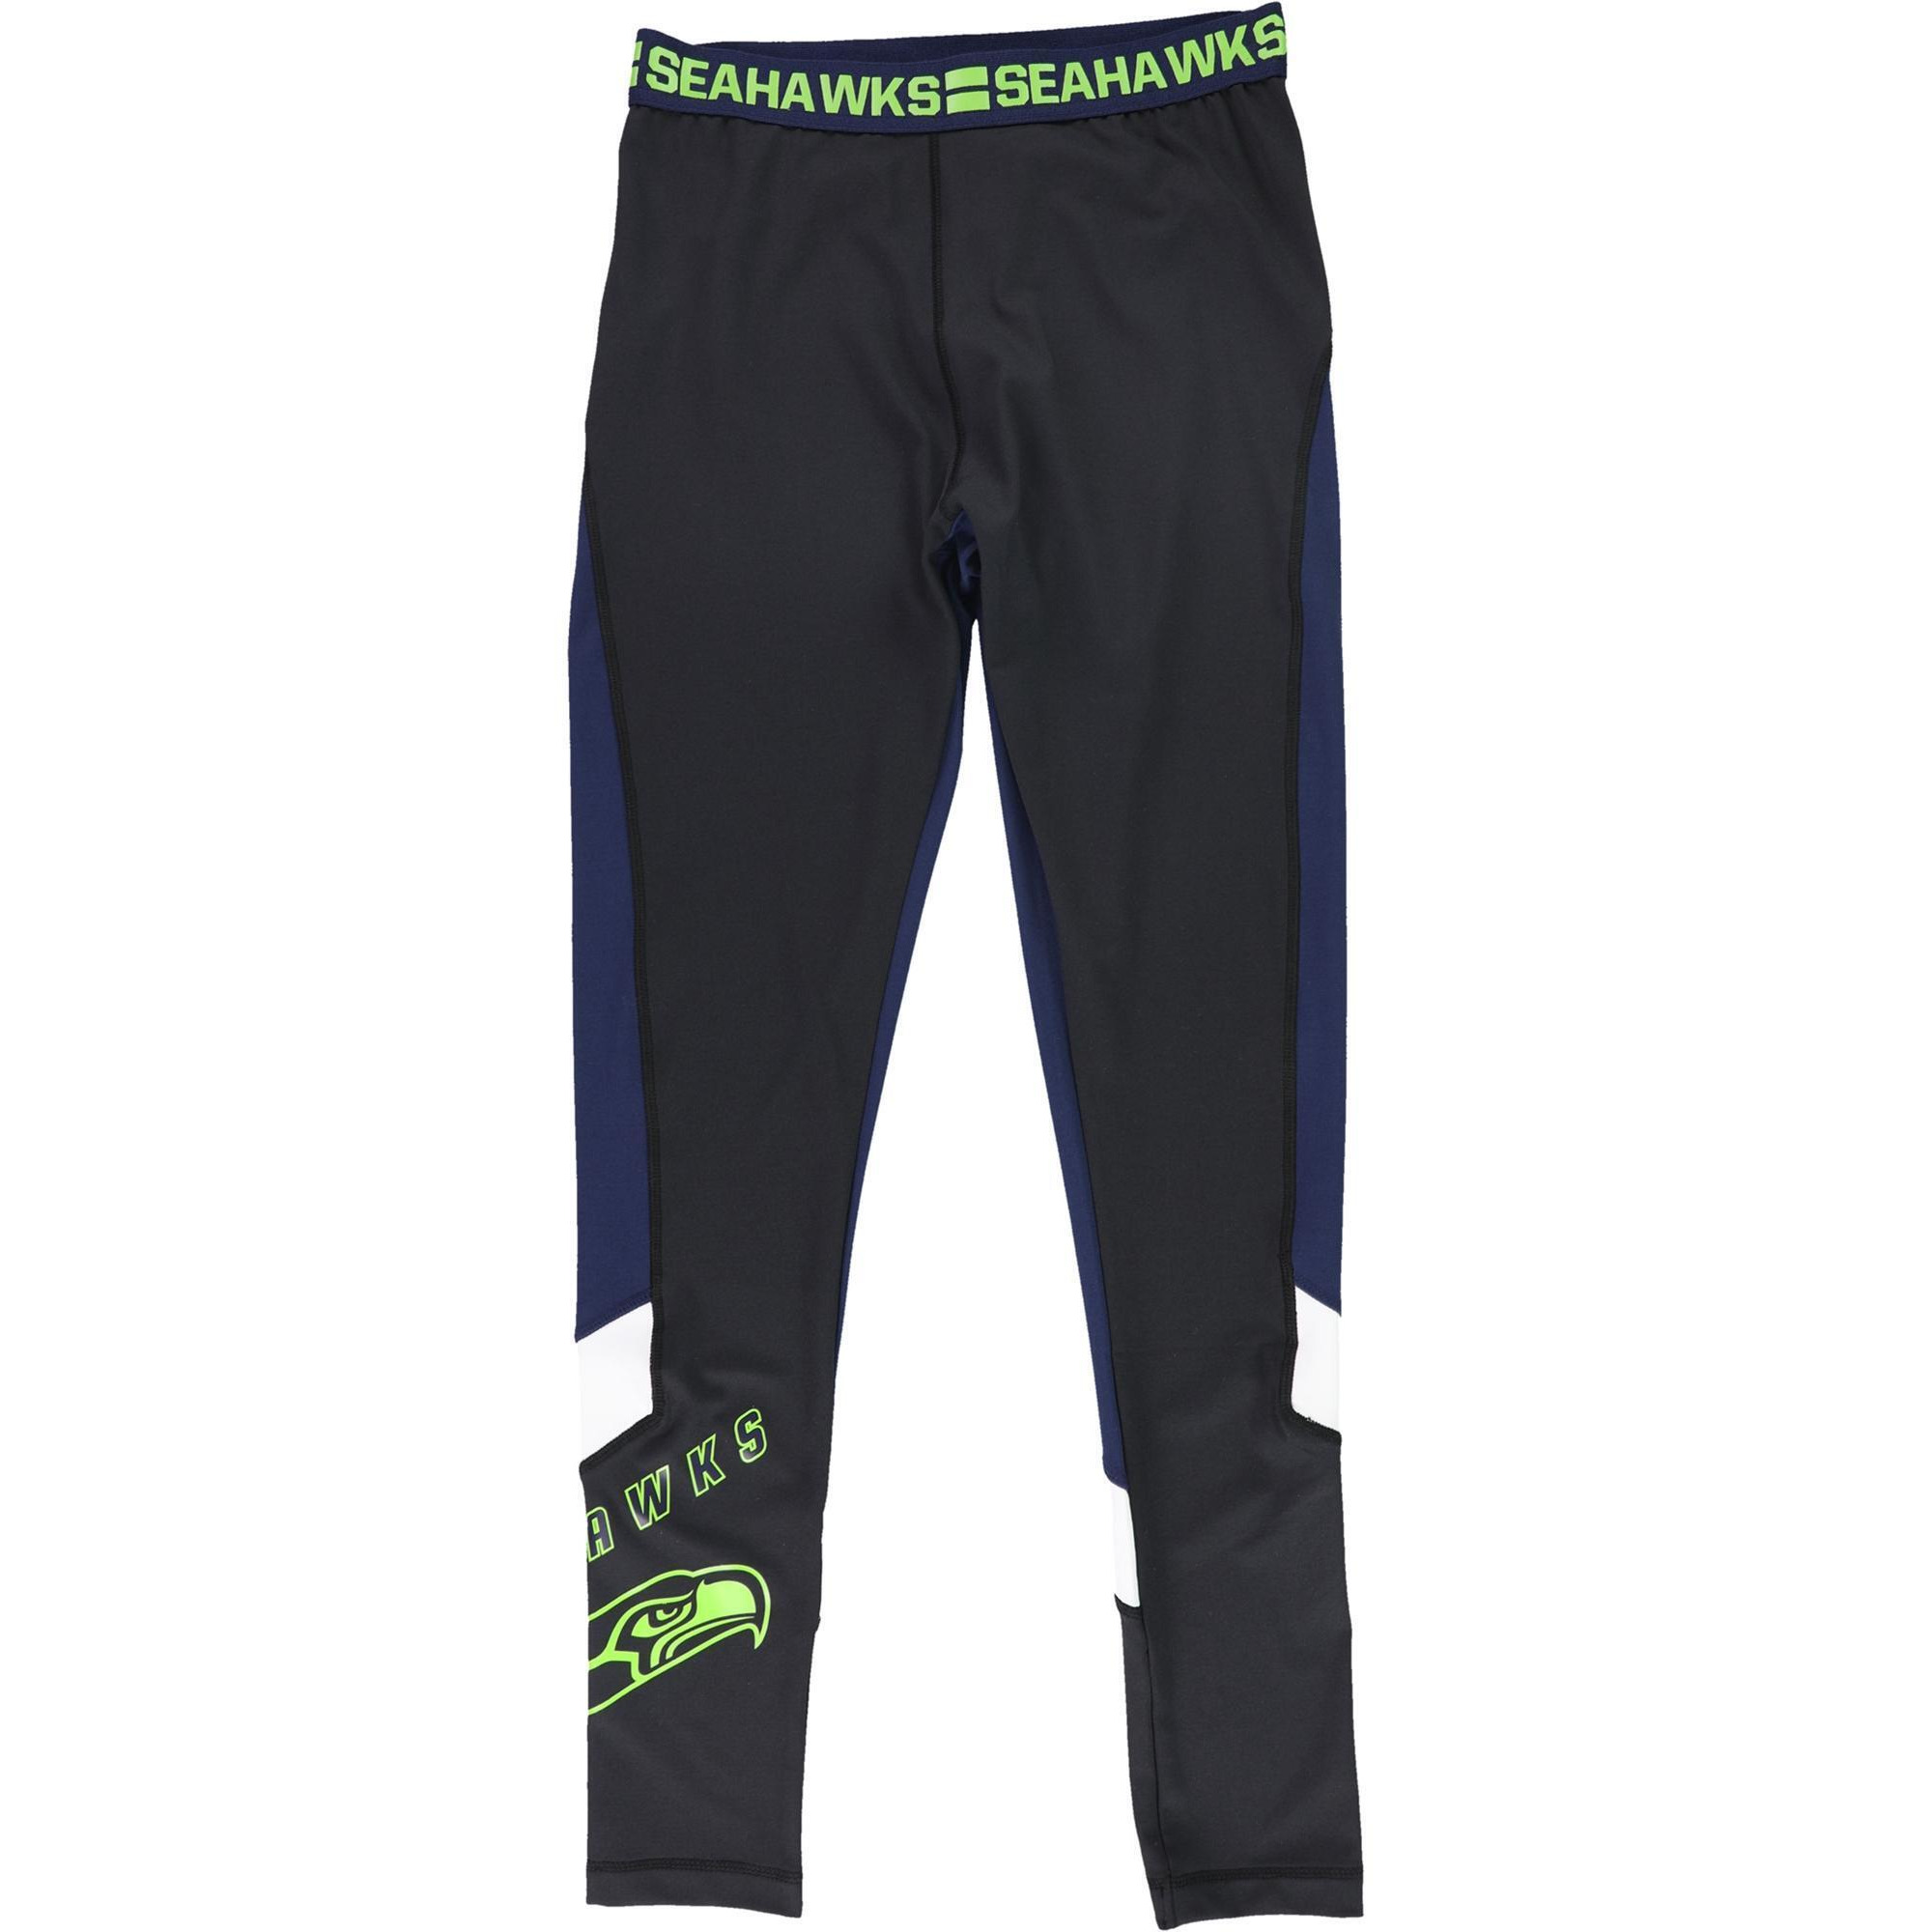 NFL Womens Seattle Seahawks Compression Athletic Pants, Style # 6J90Z452